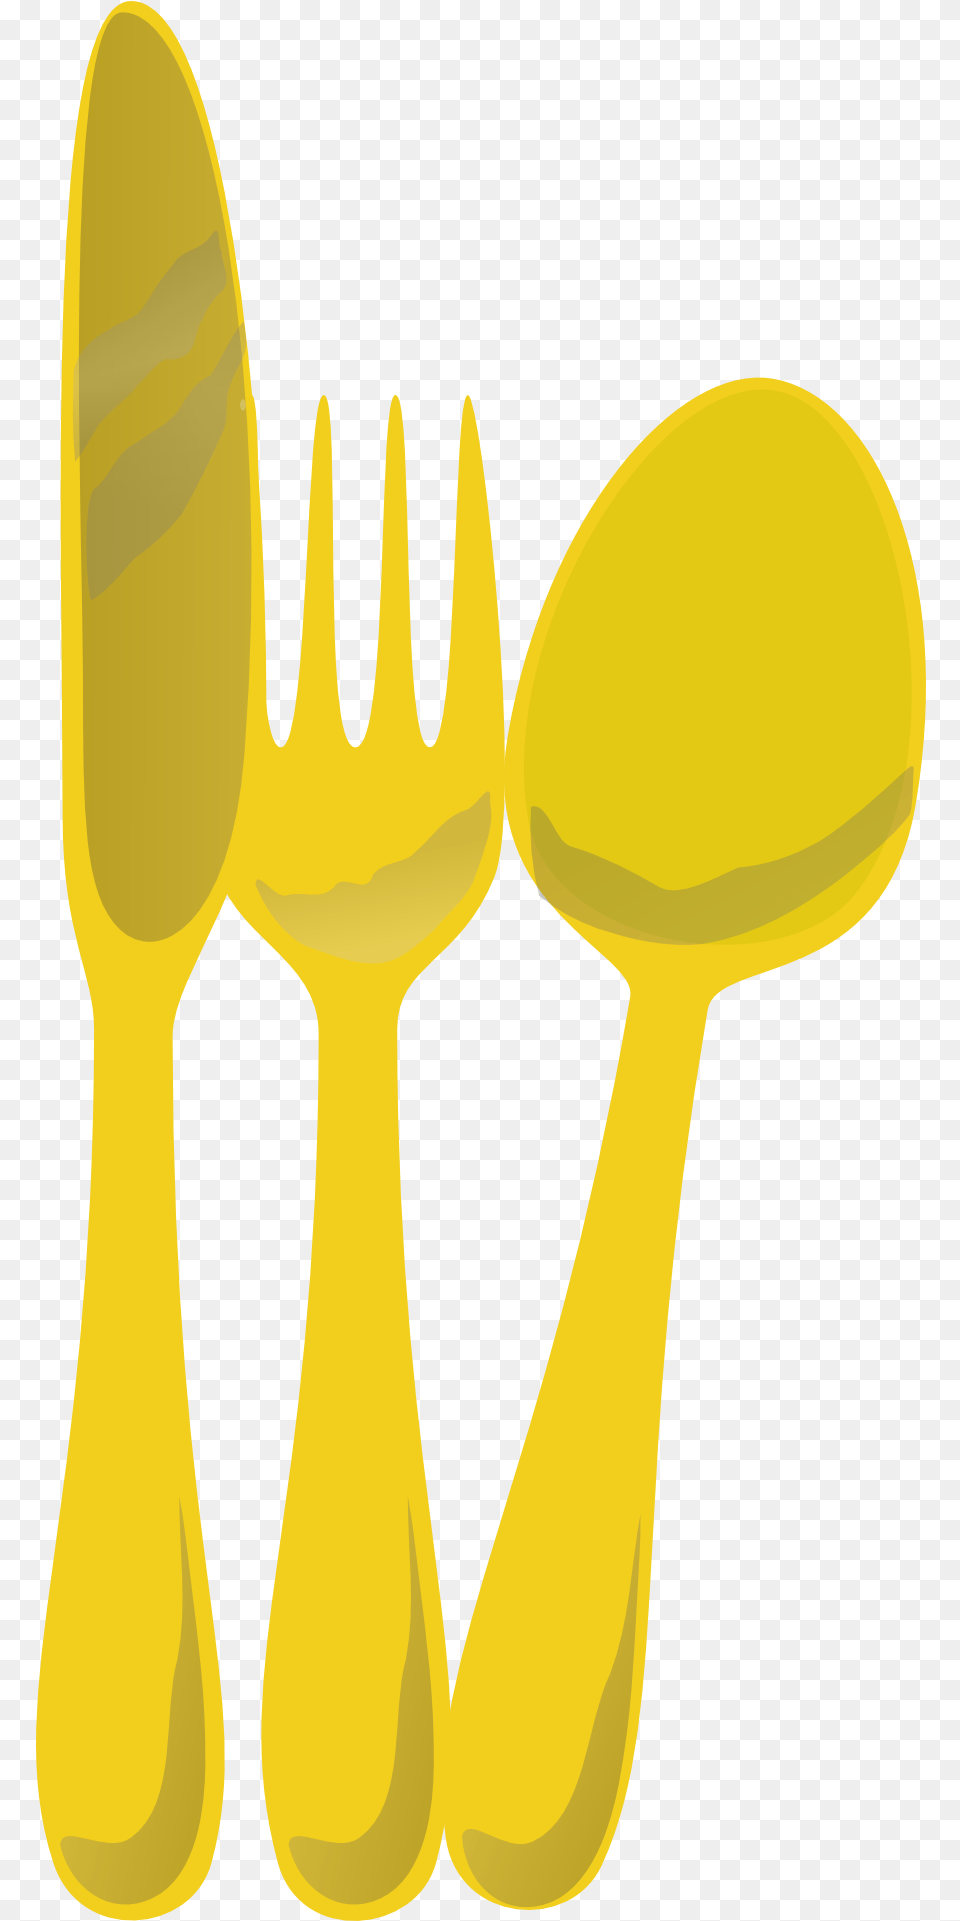 Plastic Spoon And Fork Clipart, Cutlery, Smoke Pipe Png